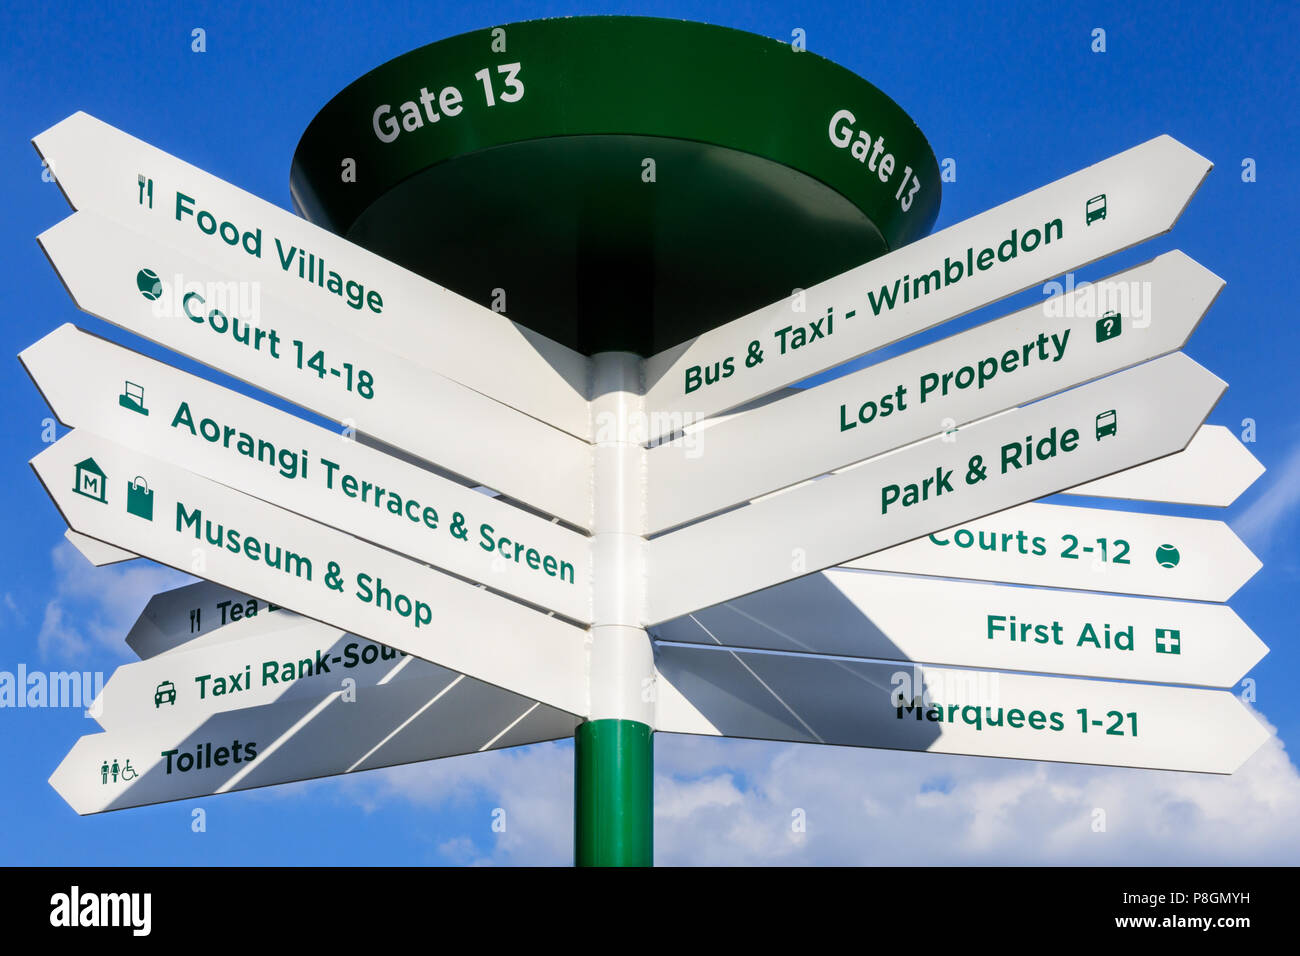 Visitor information sign and directions with guidance to courts at Wimbledon Championships 2018, All England Lawn Tennis Club, London, UK Stock Photo